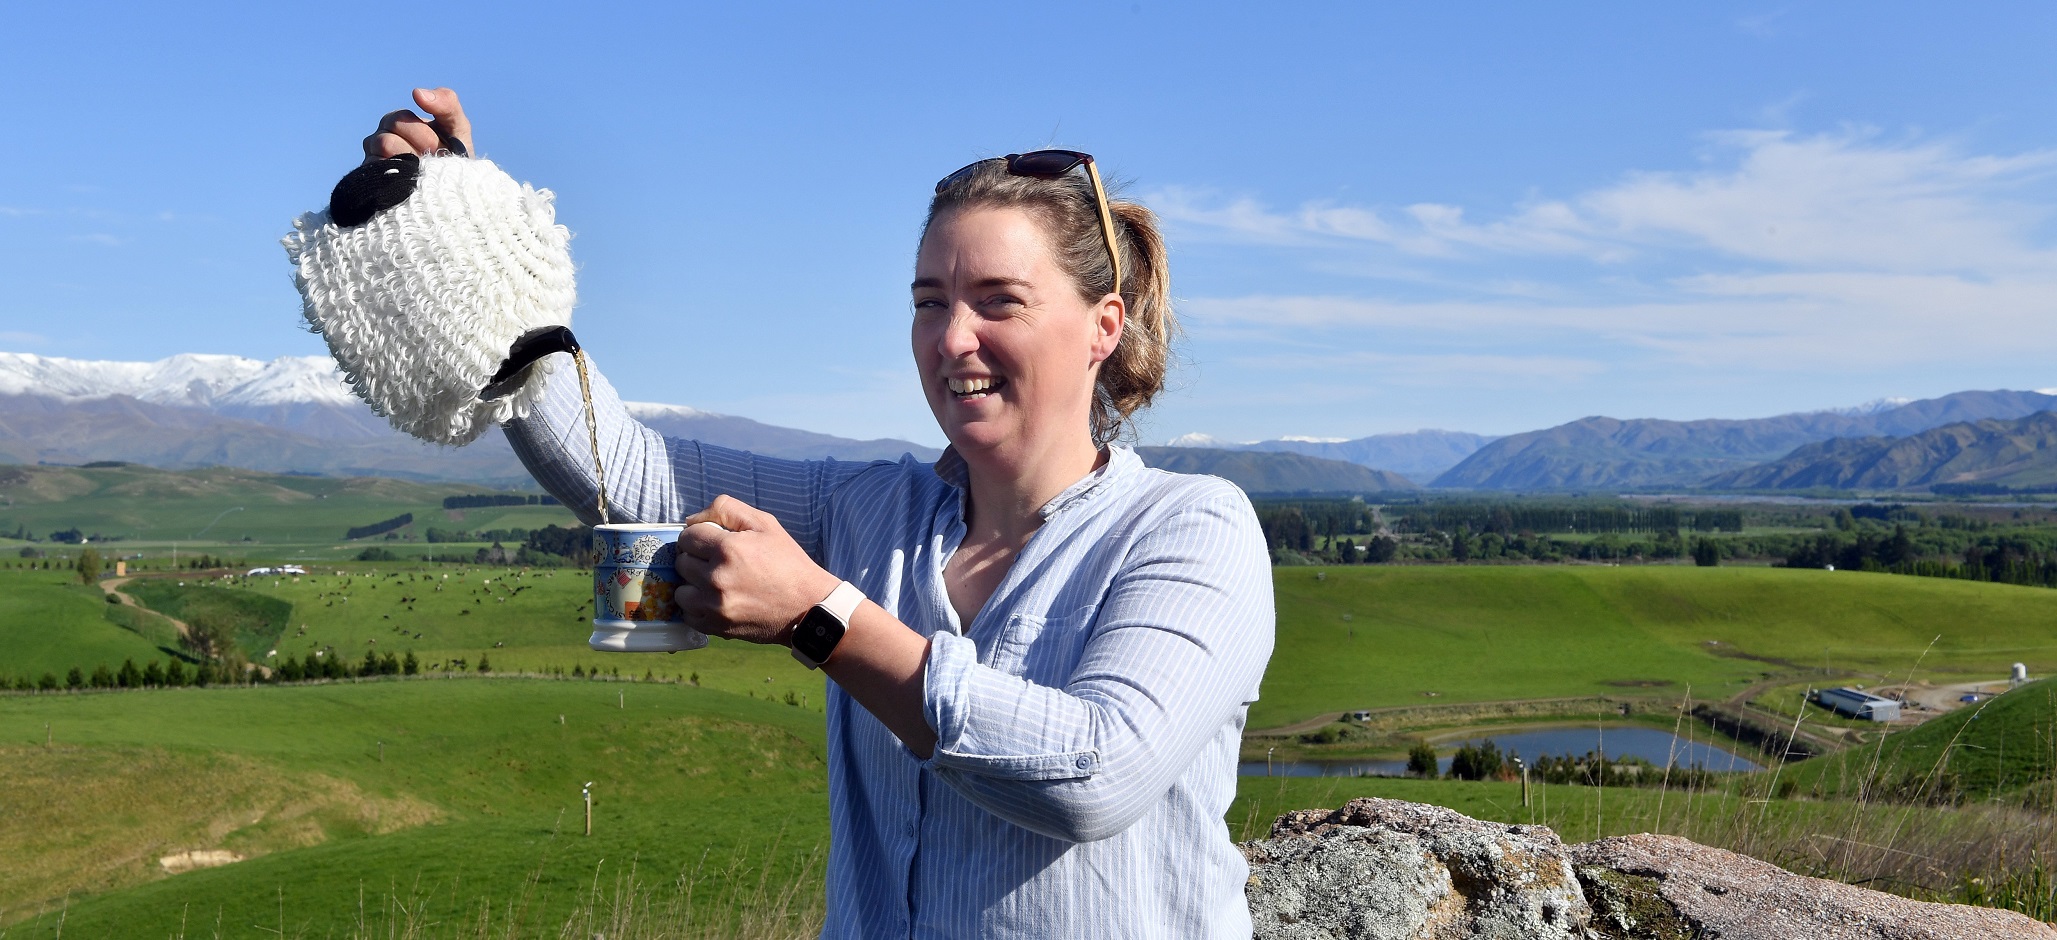 Year of the Farmer winner Myfanwy Alexander, pictured on the Duntroon farm where she is a...